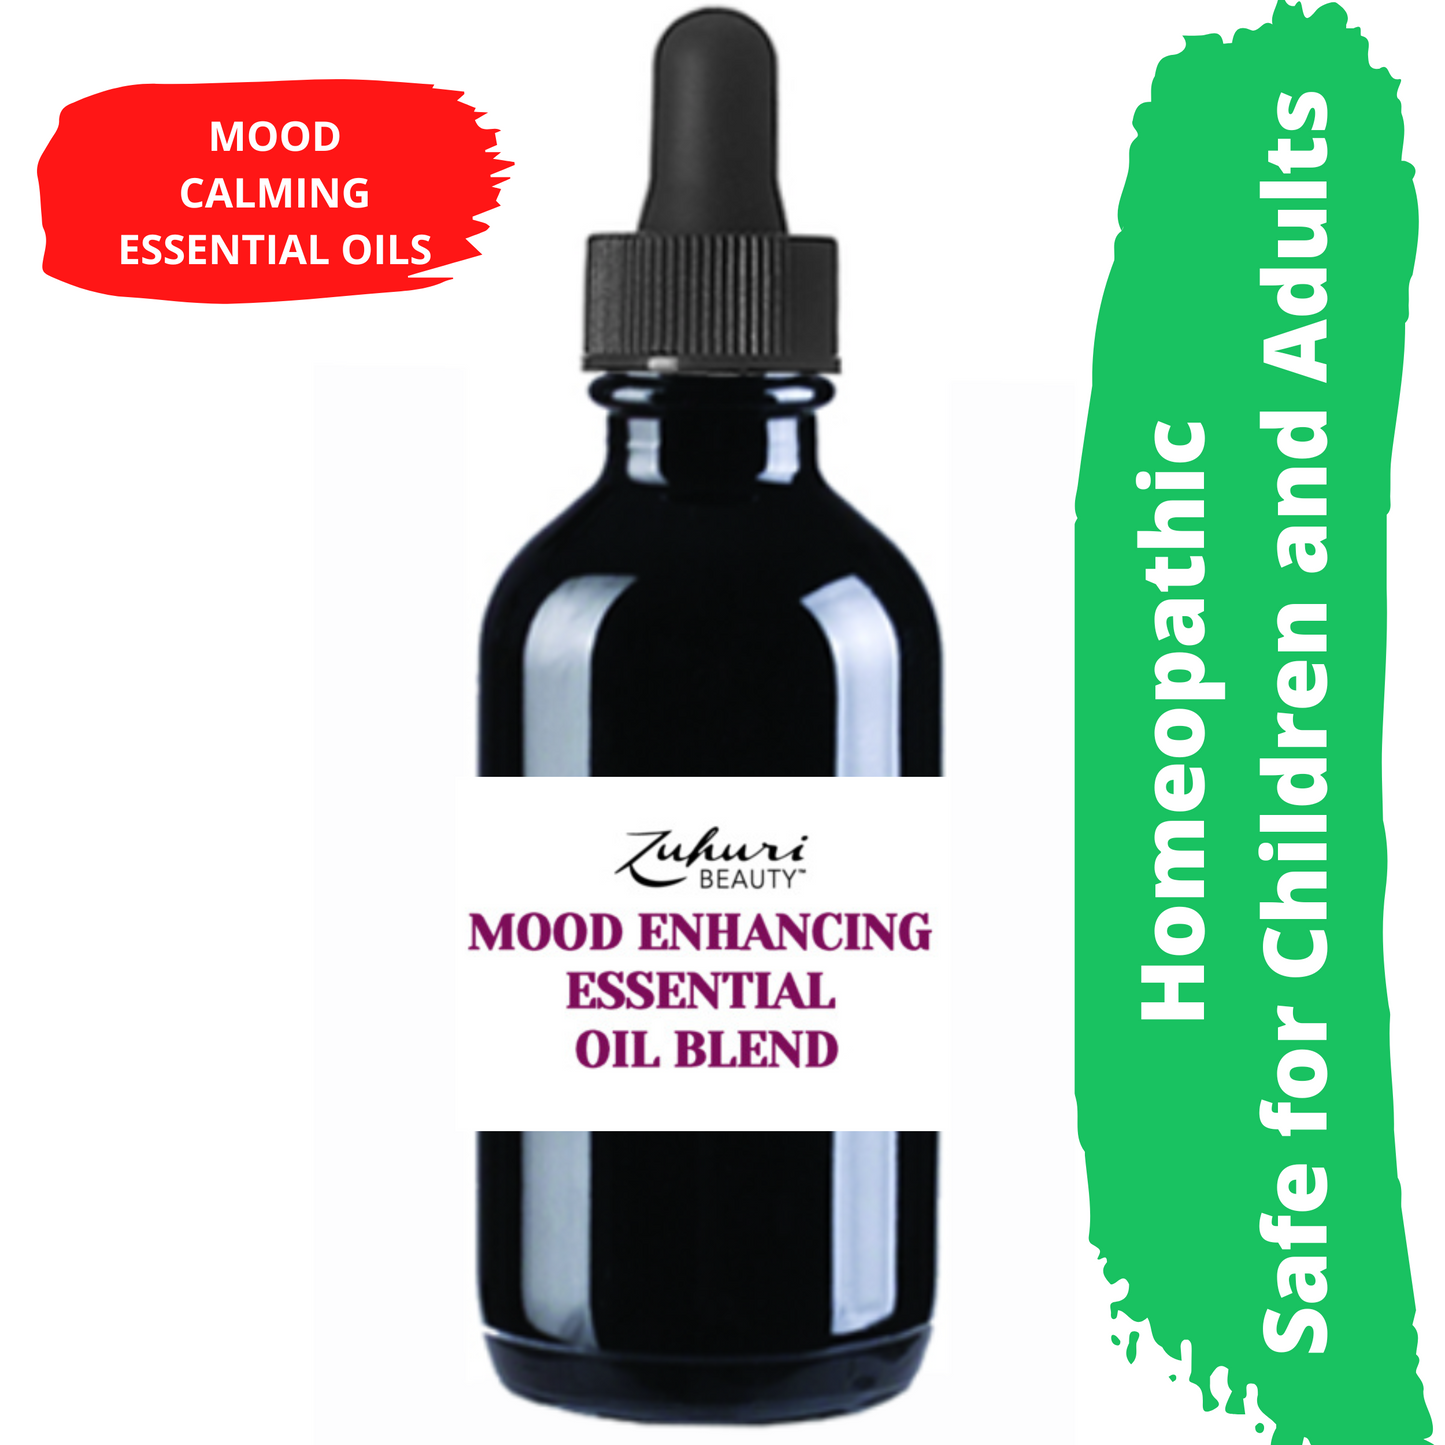 Mood Oil, Ashwaghanda, Homeopathic, Pressure Points, Zuhuri Beauty Mood Oil, Etsy Essential Oil Blend, Depression remedy, Frankinsence Essential Oil for Anxiety, Zuhuri Beauty Oils